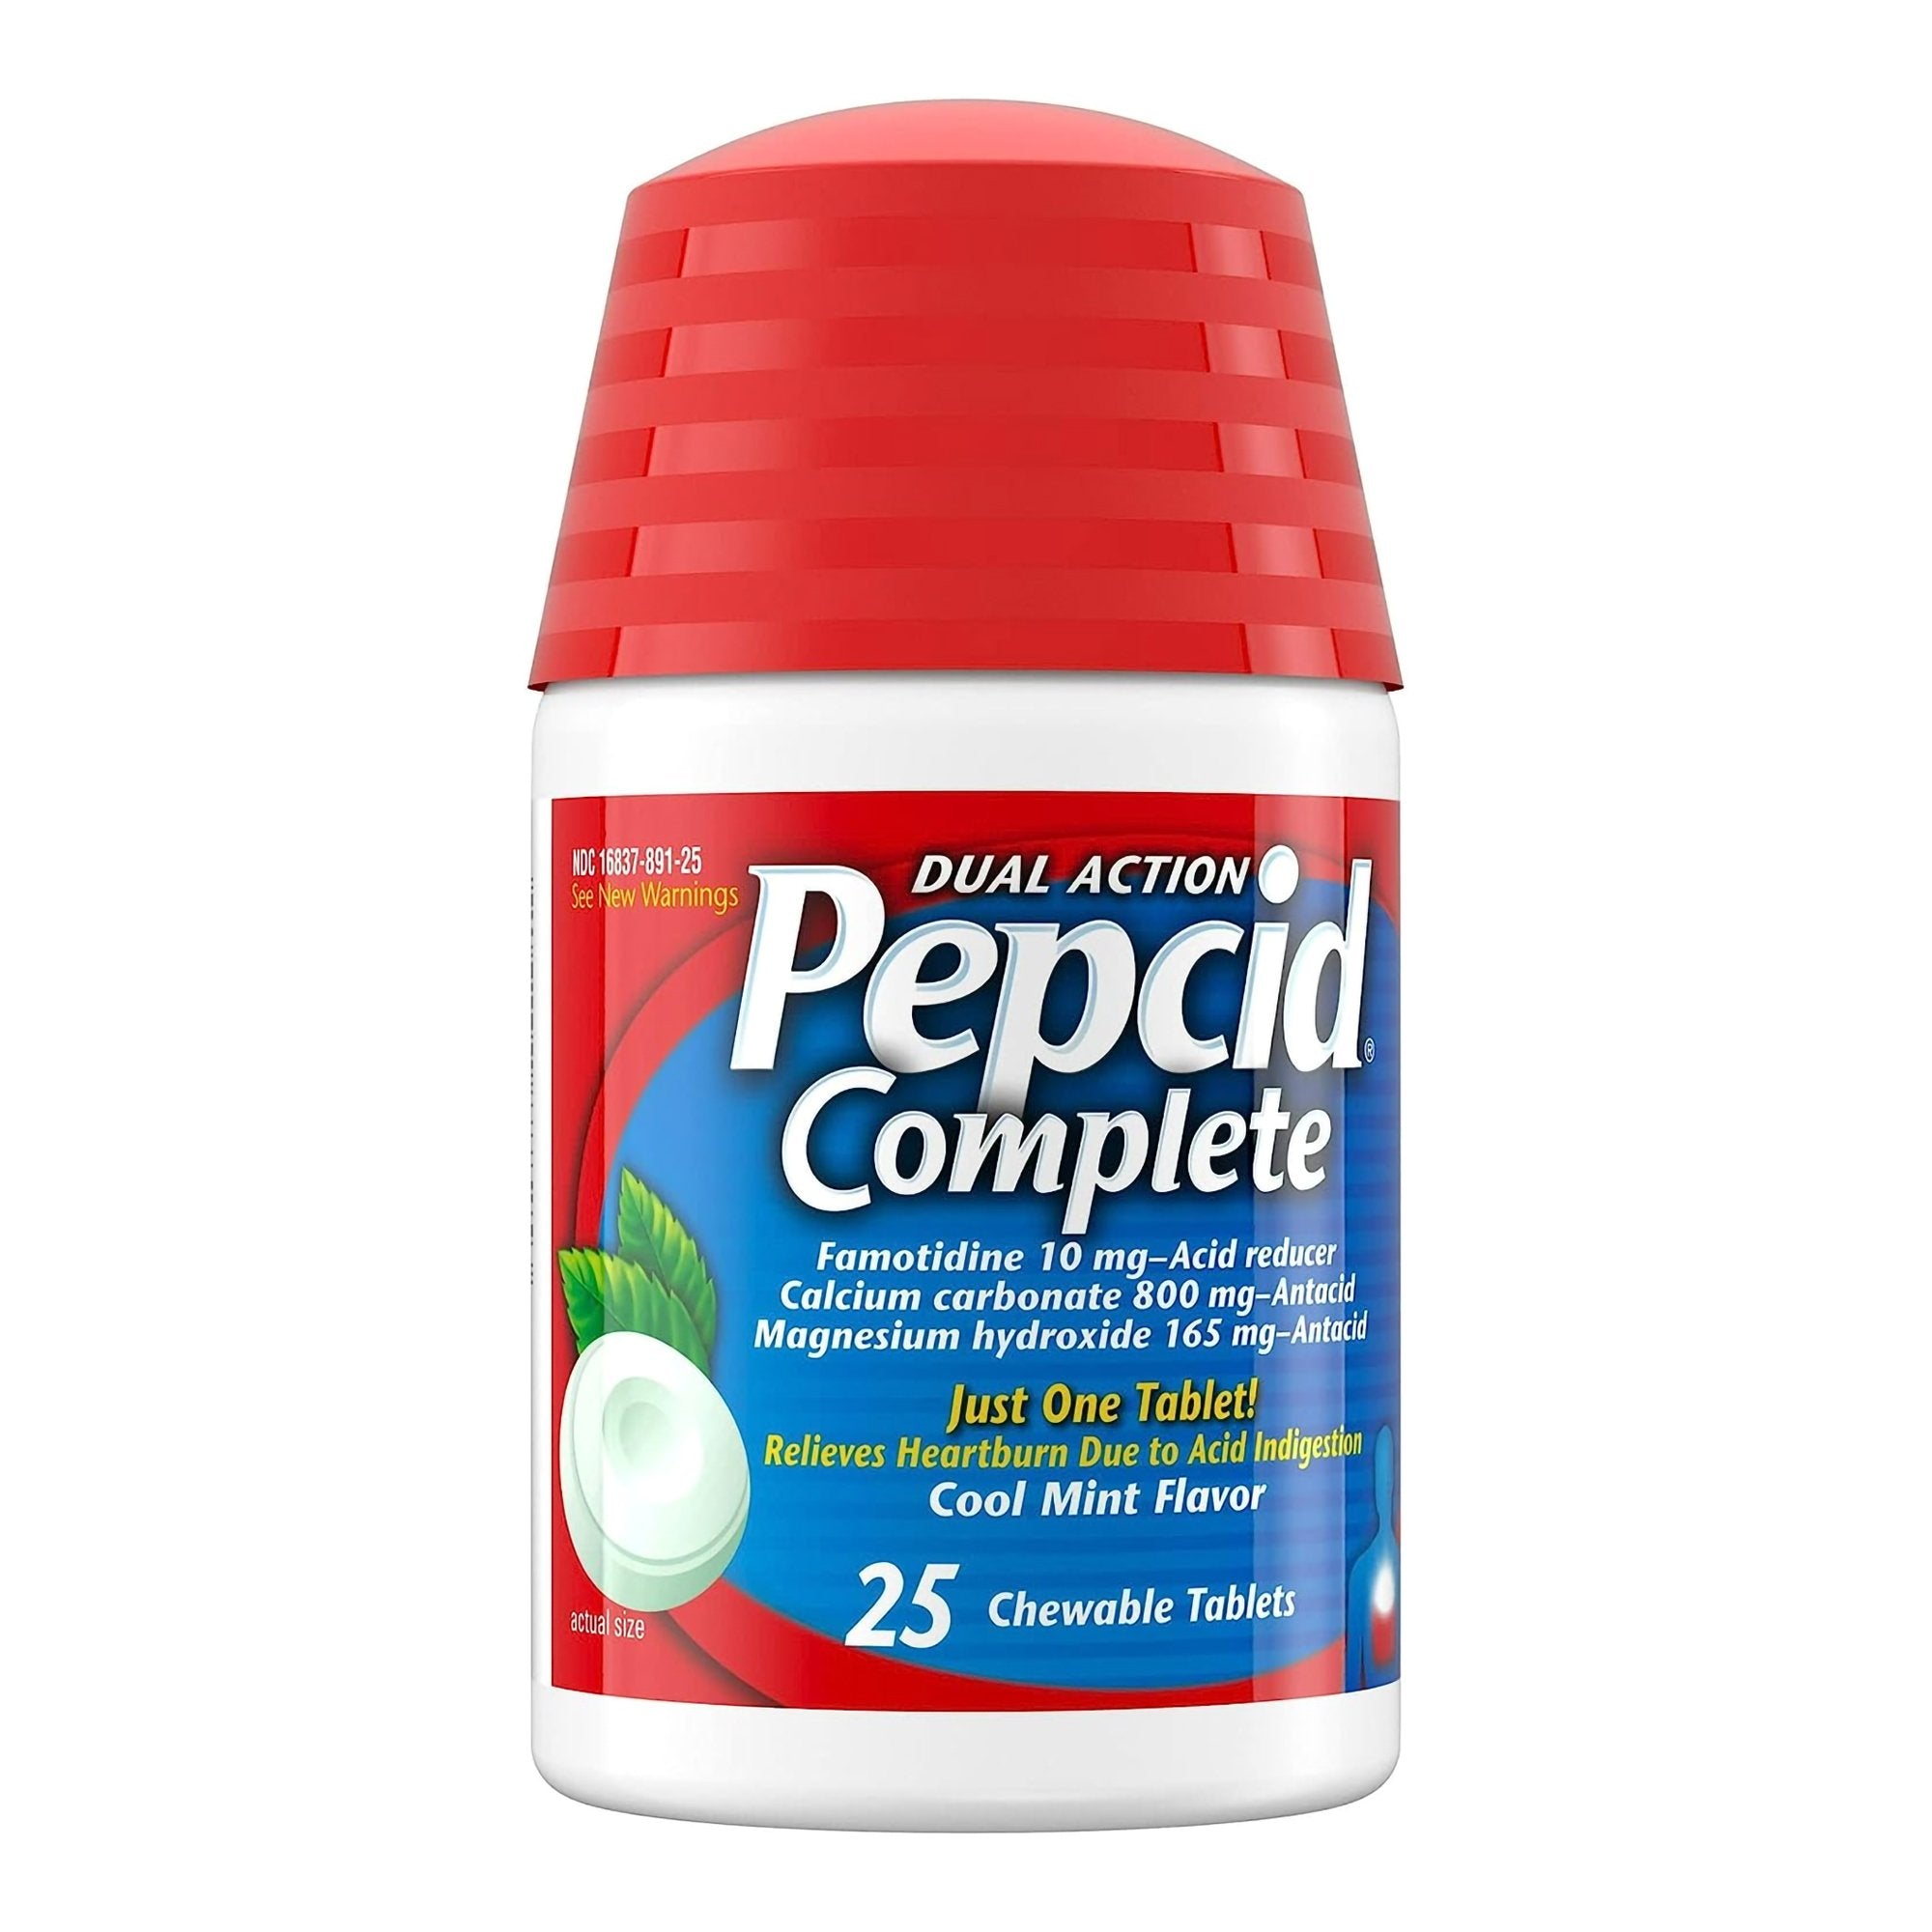 Antacid Pepcid® Complete 800 mg - 165 mg - 10 mg Strength Chewable Tablet 25 per Bottle